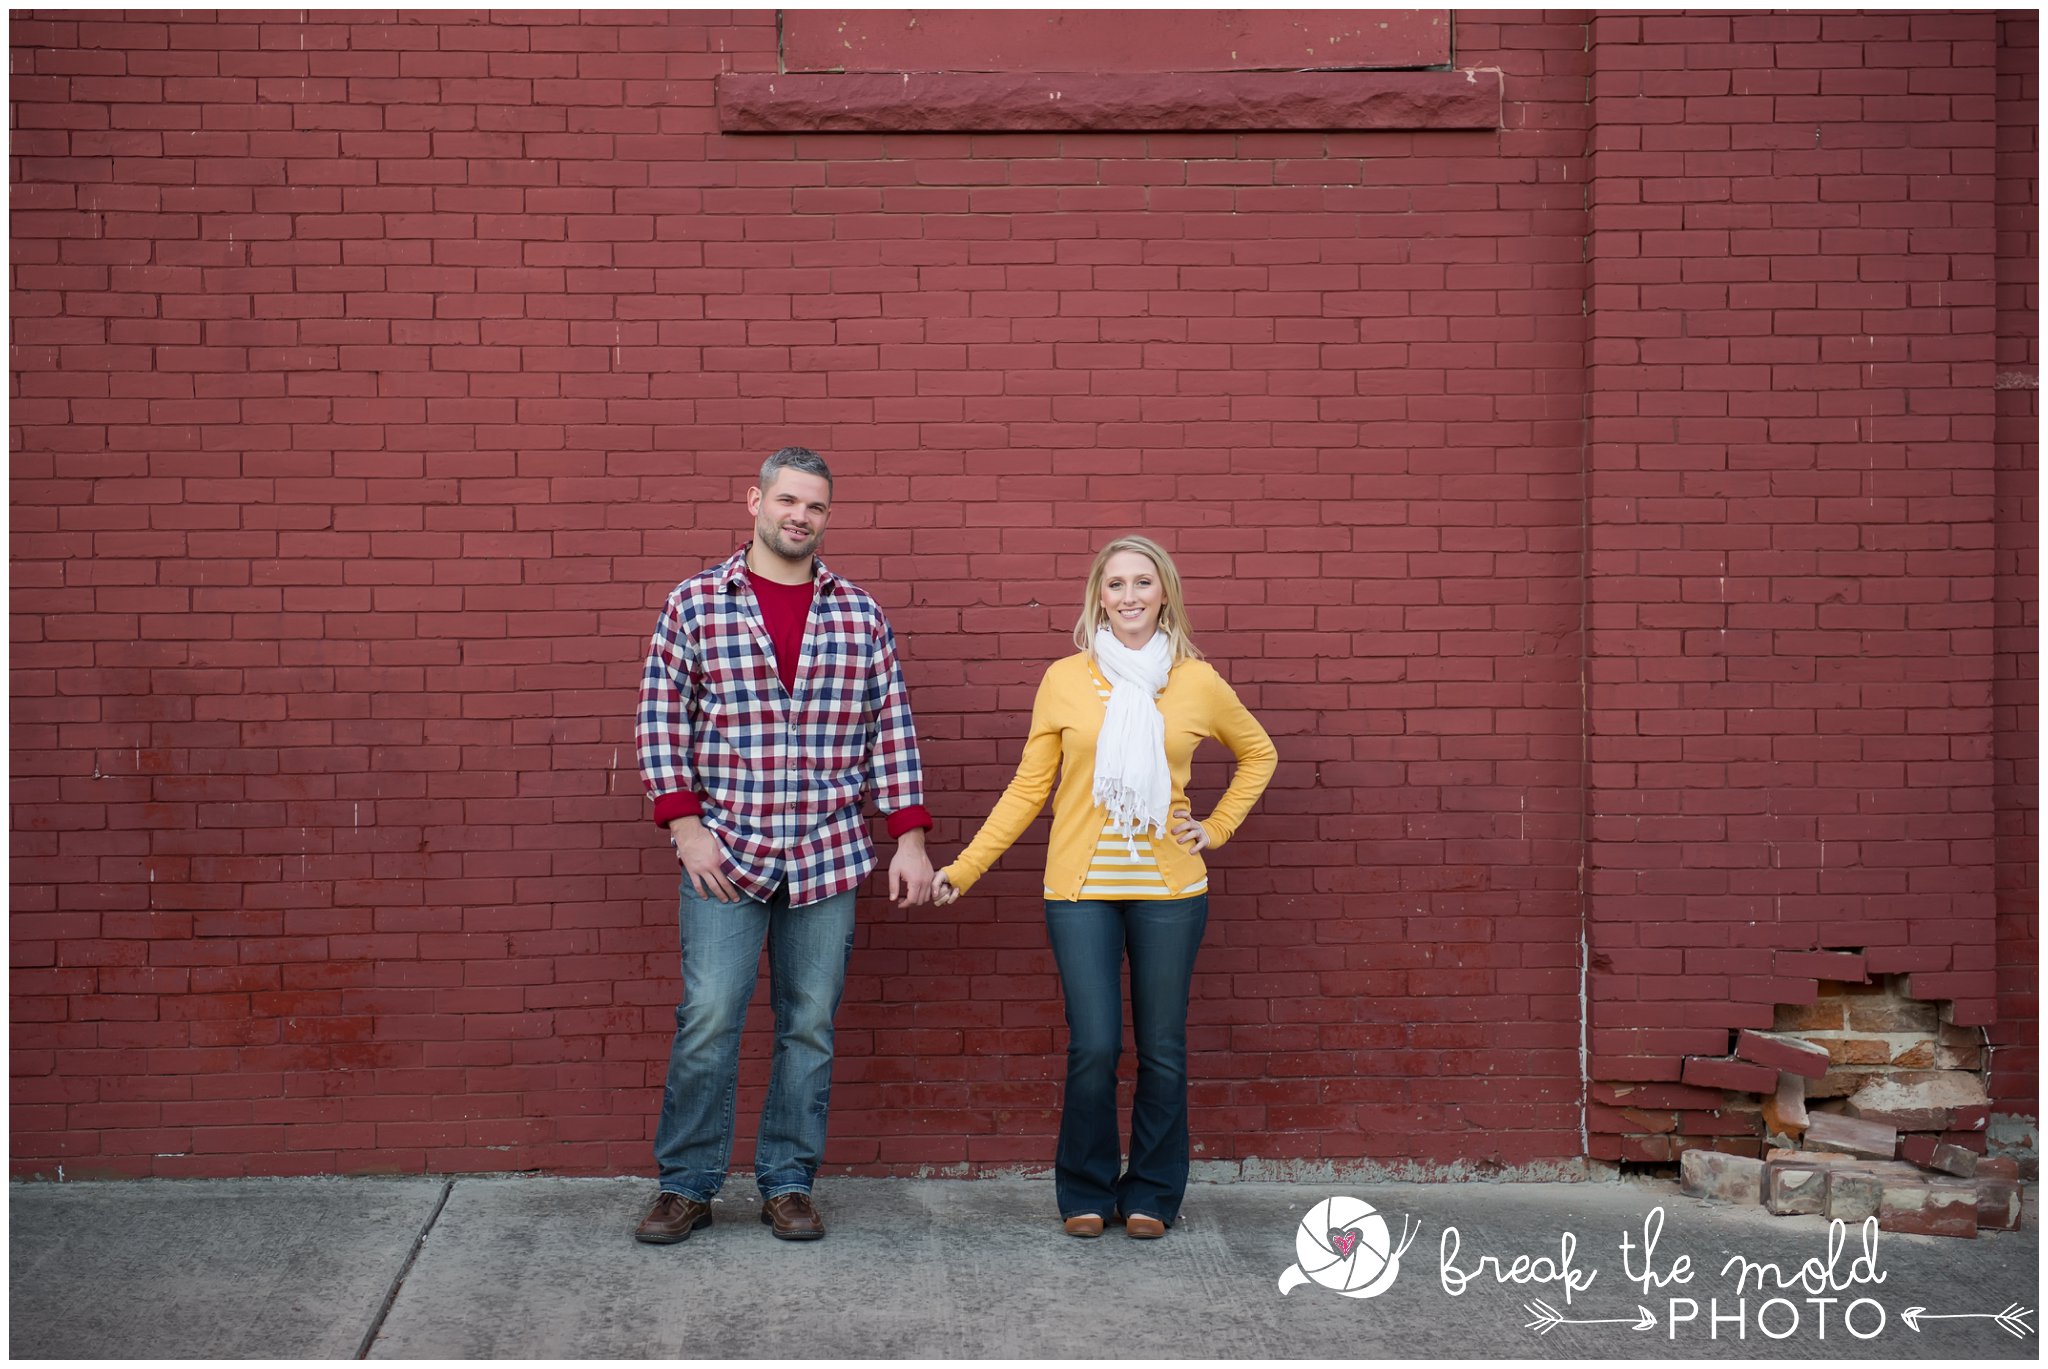 break-the-mold-photo-knoxville-tn-lenoir-city-downtown-outdoor-hiking-engagement-session_2013.jpg